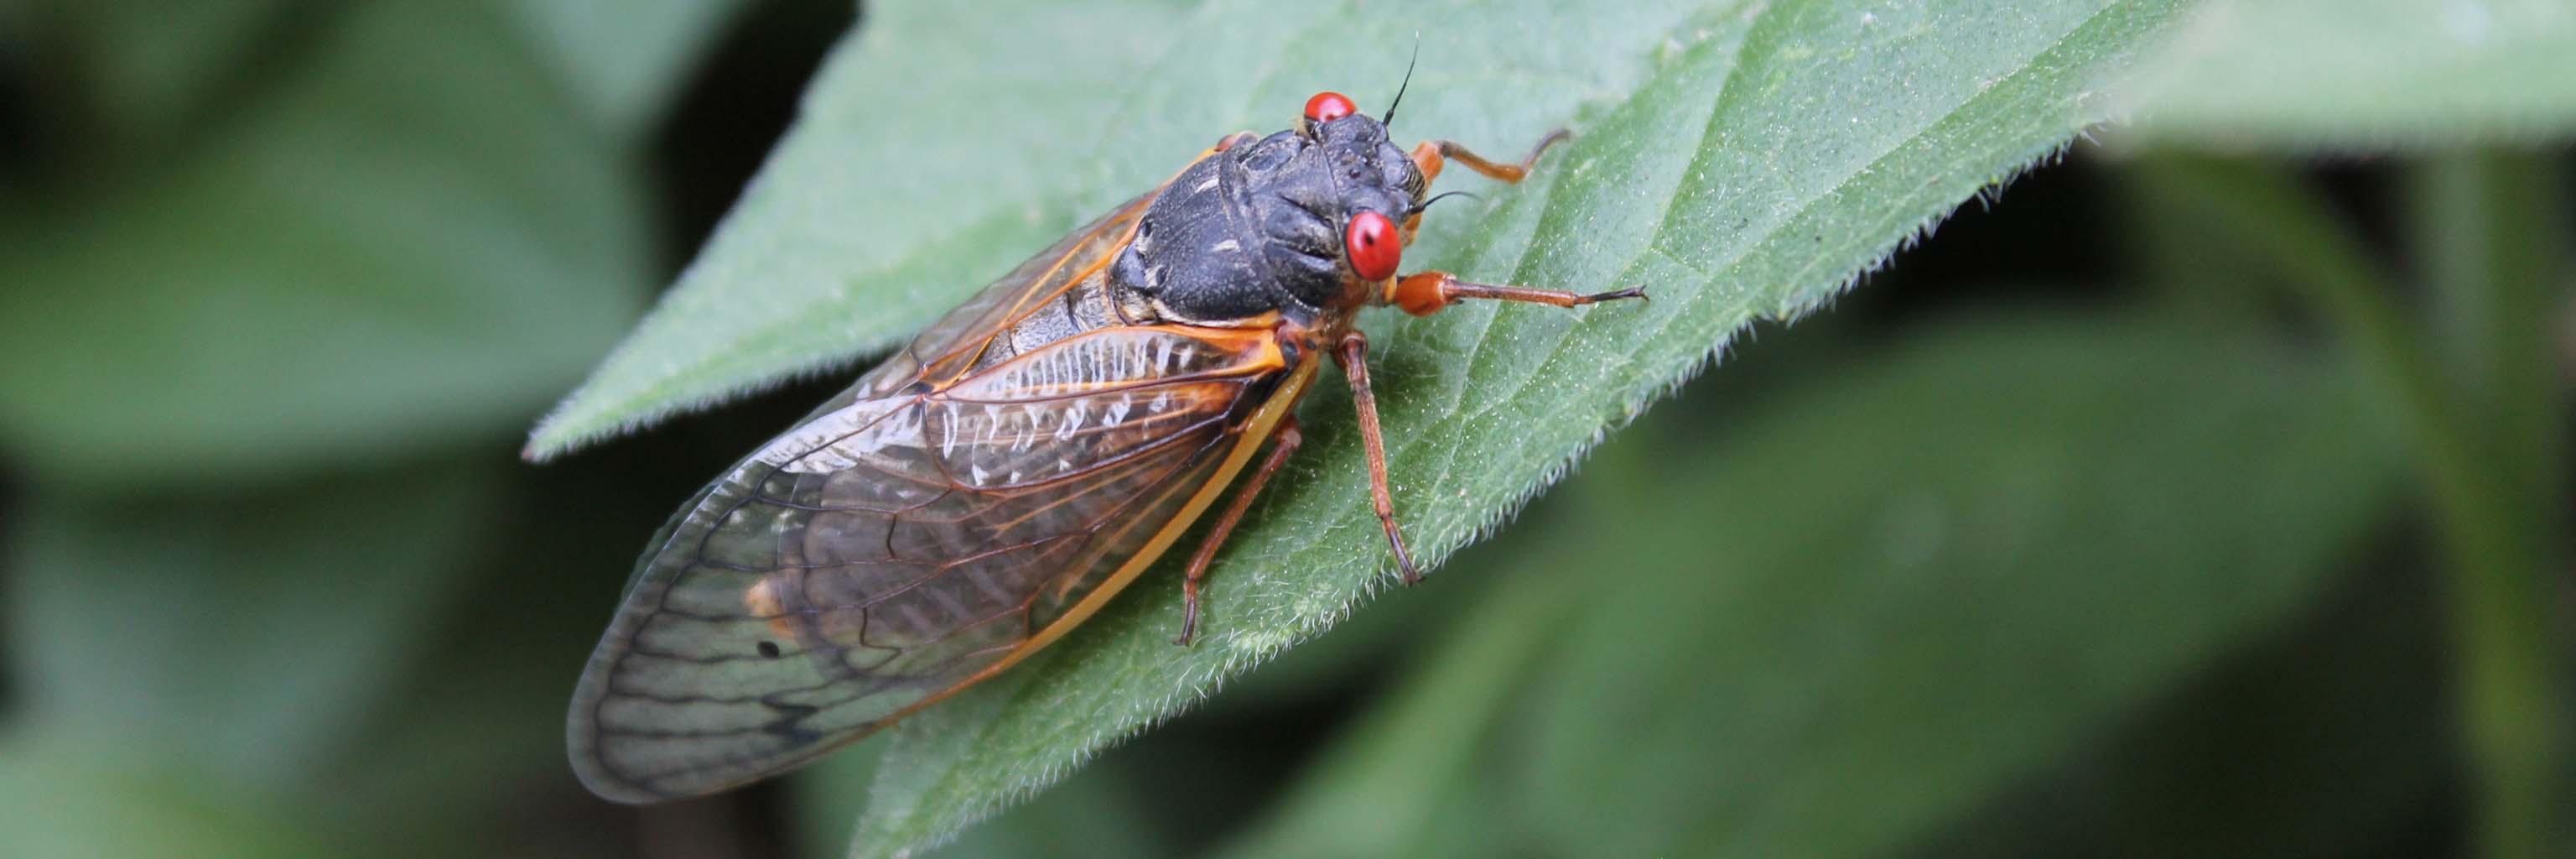 A red-eyed perennial cicada from the 2021 Brood X emergence rests on a leaf.